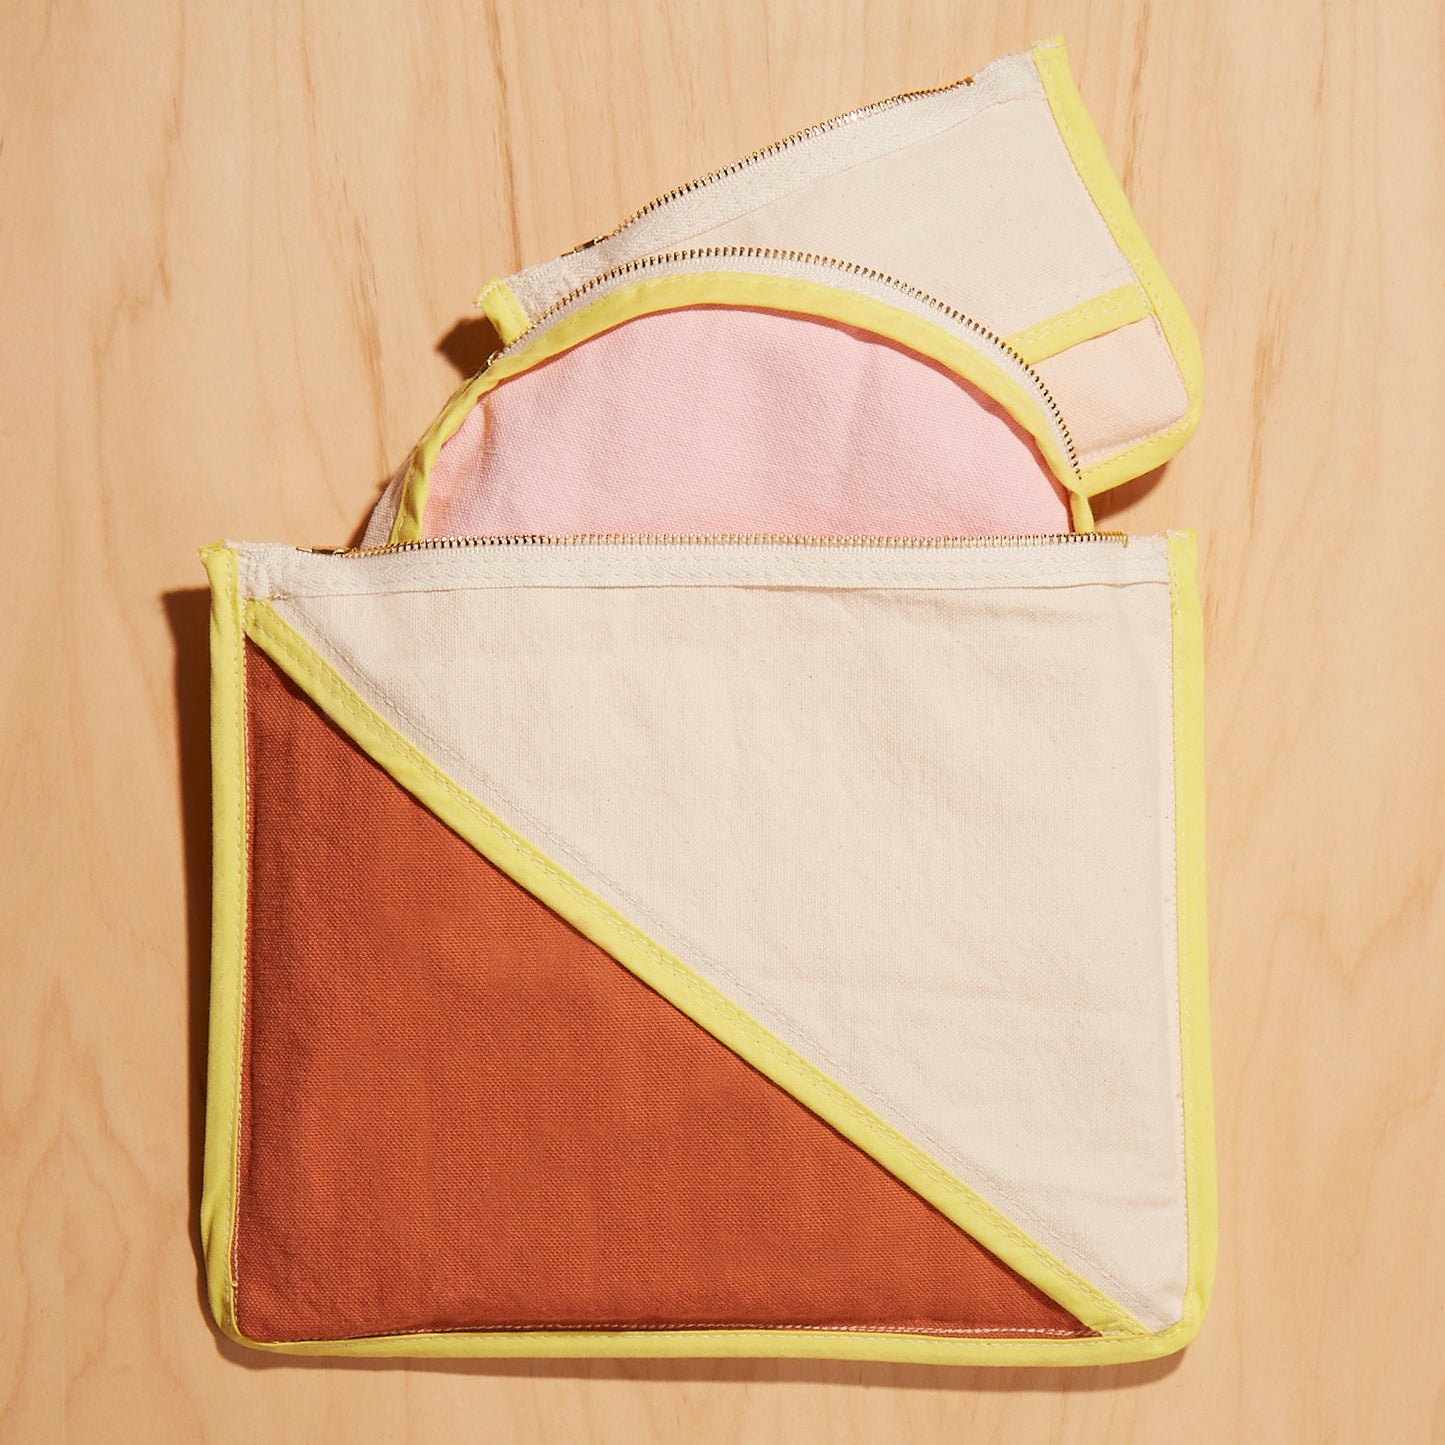 Re:Canvas "Threes" Pouch in Sunset